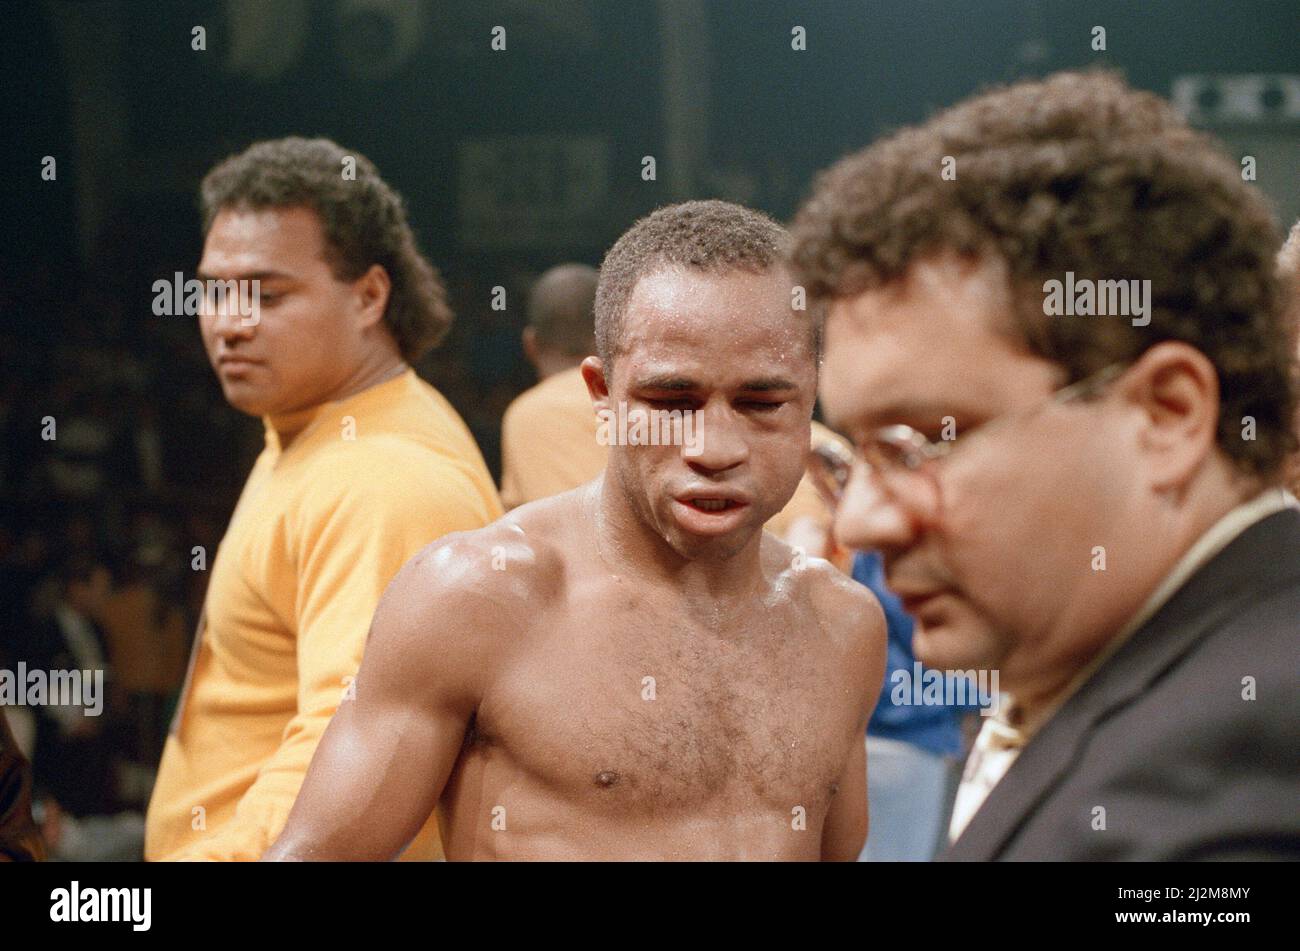 Lloyd Honeyghan vs Marlon Starling for the WBC Welterweight title. Caesars Palace, Las Vegas, Nevada, USA. Starling won by TKO in round nine to become new WBC welterweight champion.(Picture) Lloyd Honeyghan with a badly swollen face after his defeat. 4th February 1989. Stock Photo